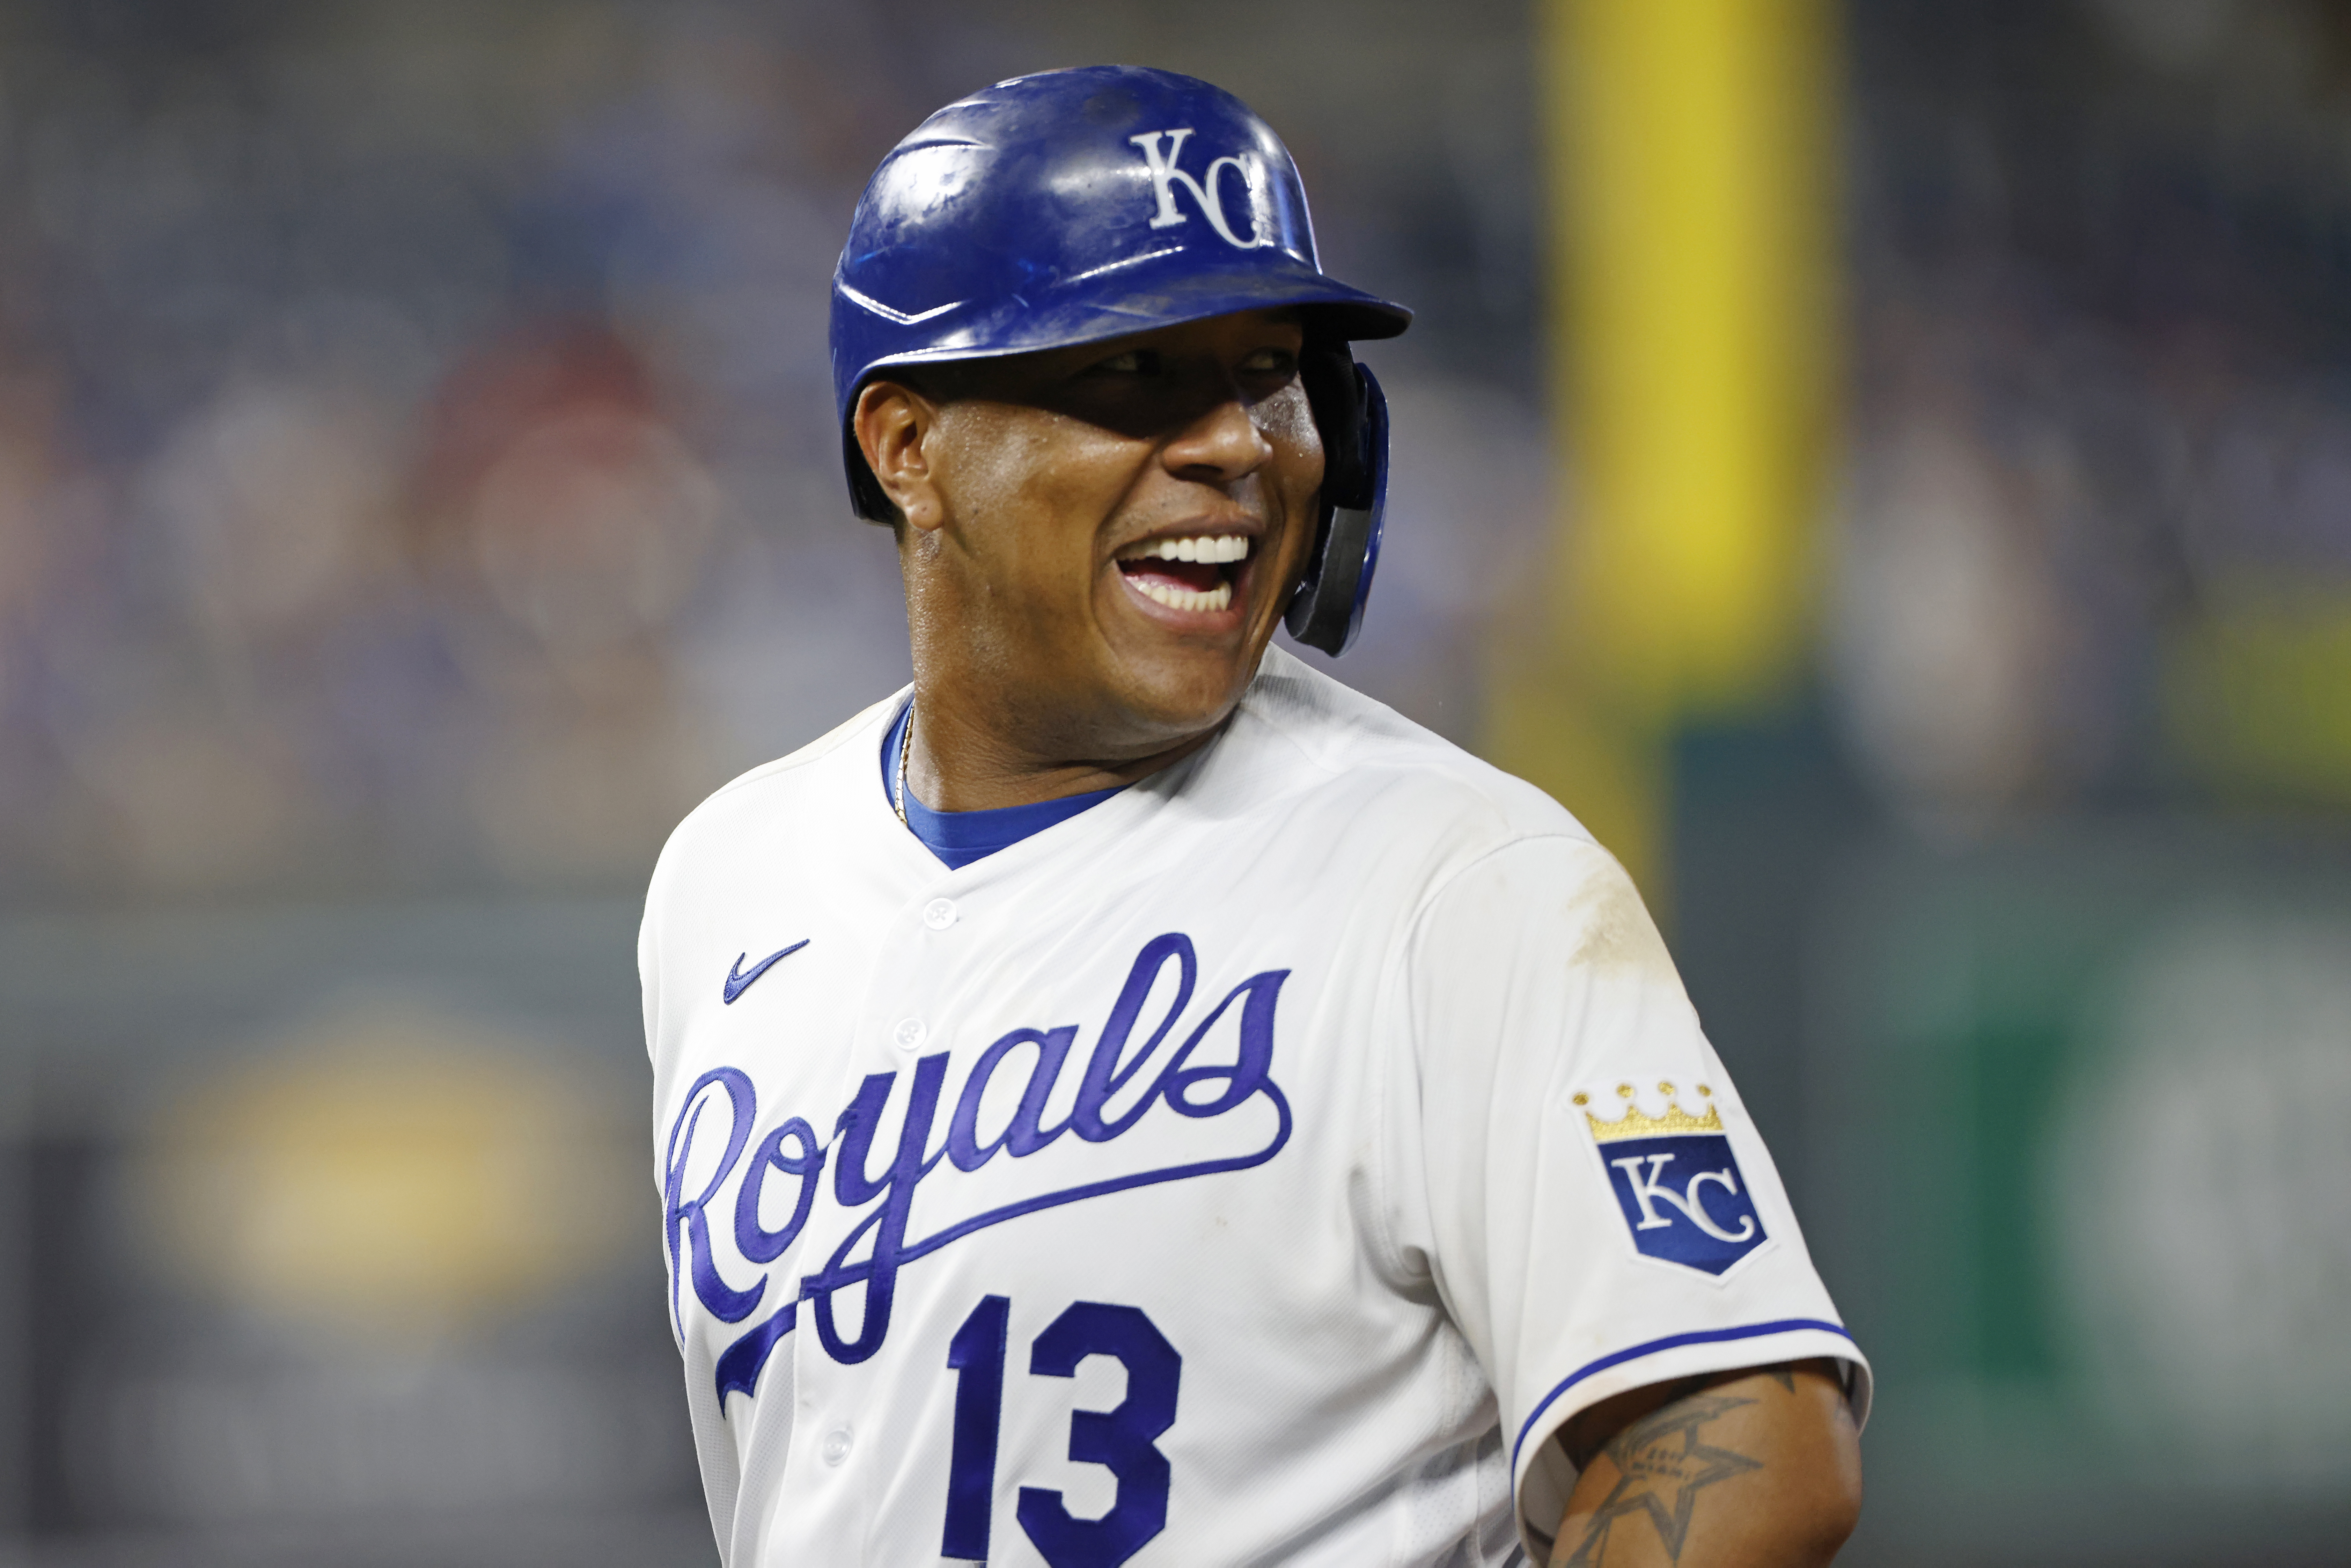 An extreme honor': Salvador Perez named 4th team captain in Royals